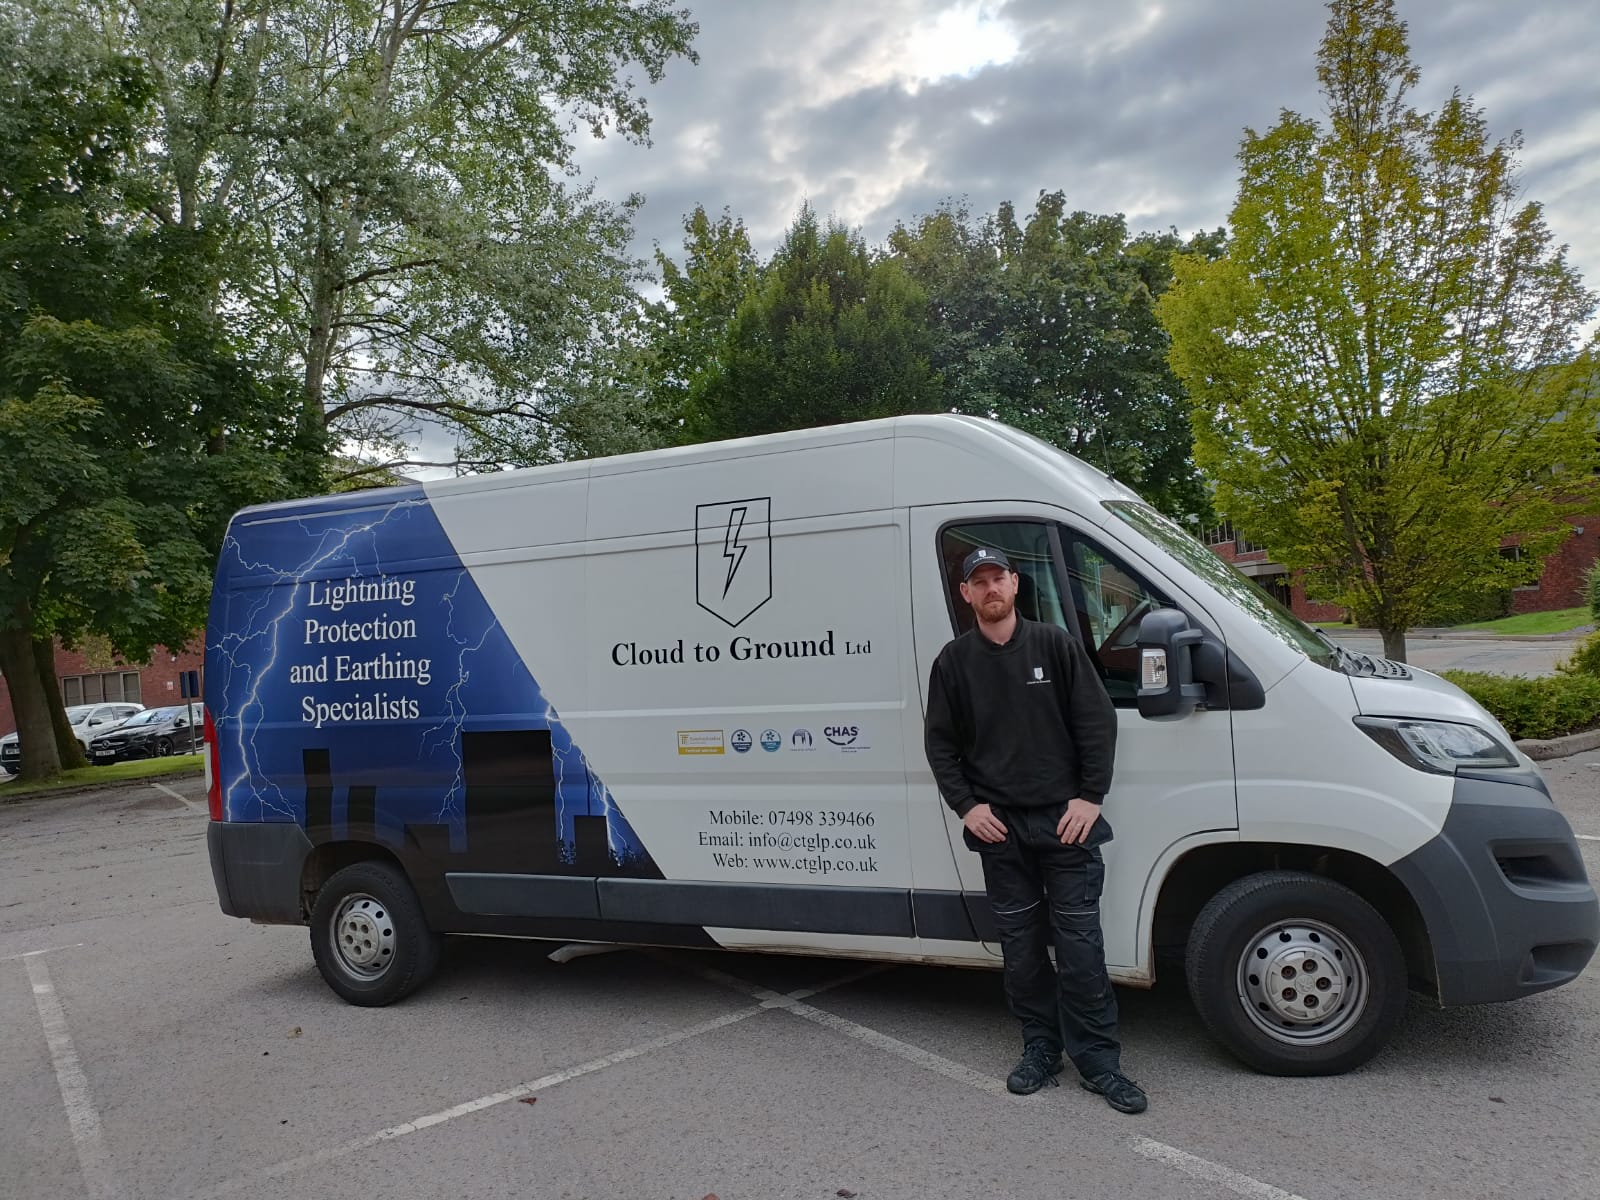 Cloud to Ground support East Cheshire Hospice